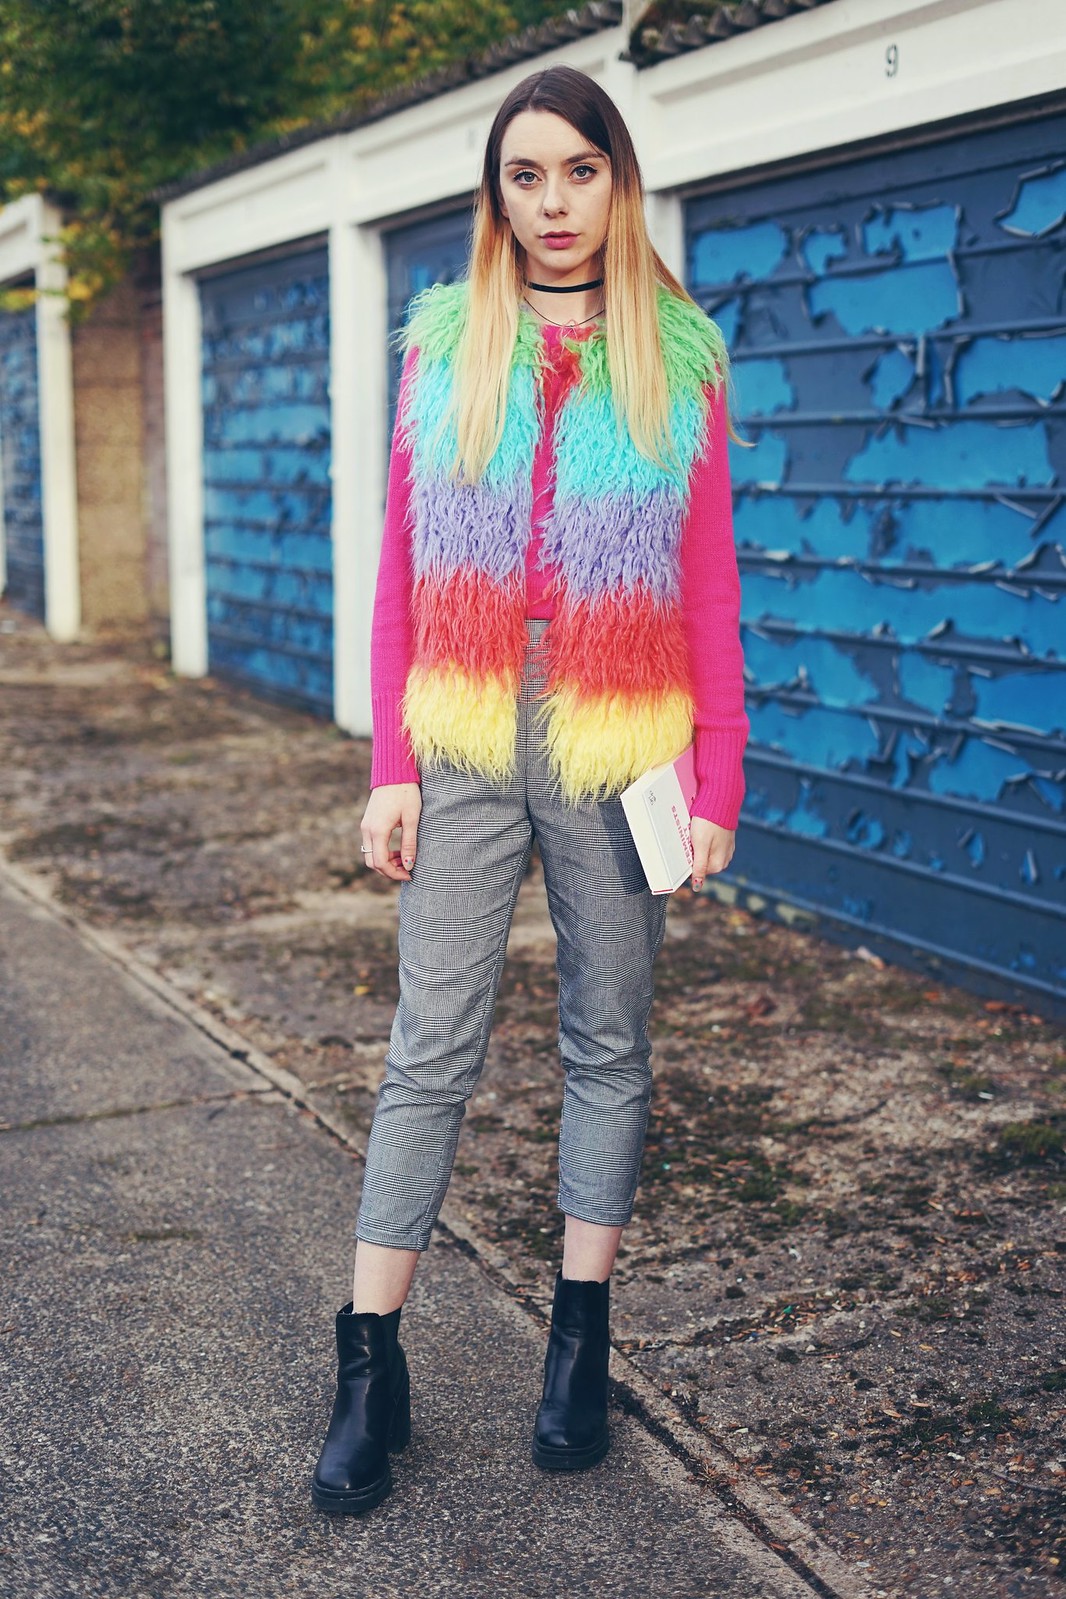 Topshop Rainboy Fluffy Gilet and Feminists Don't Wear Pink